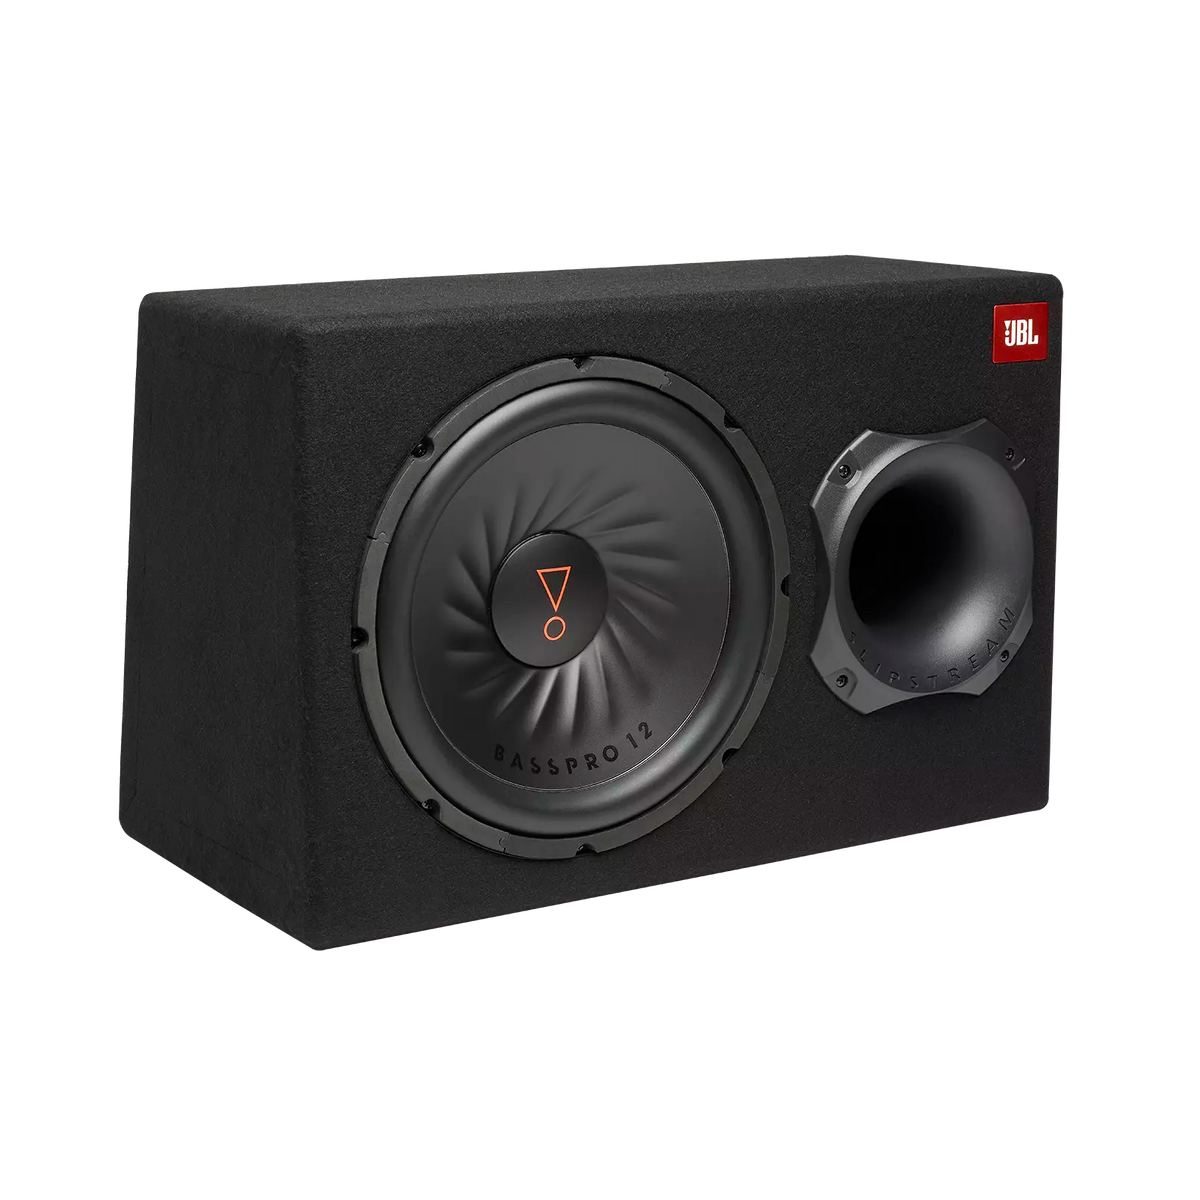 Powered Subwoofer System with Slipstream Port Technology